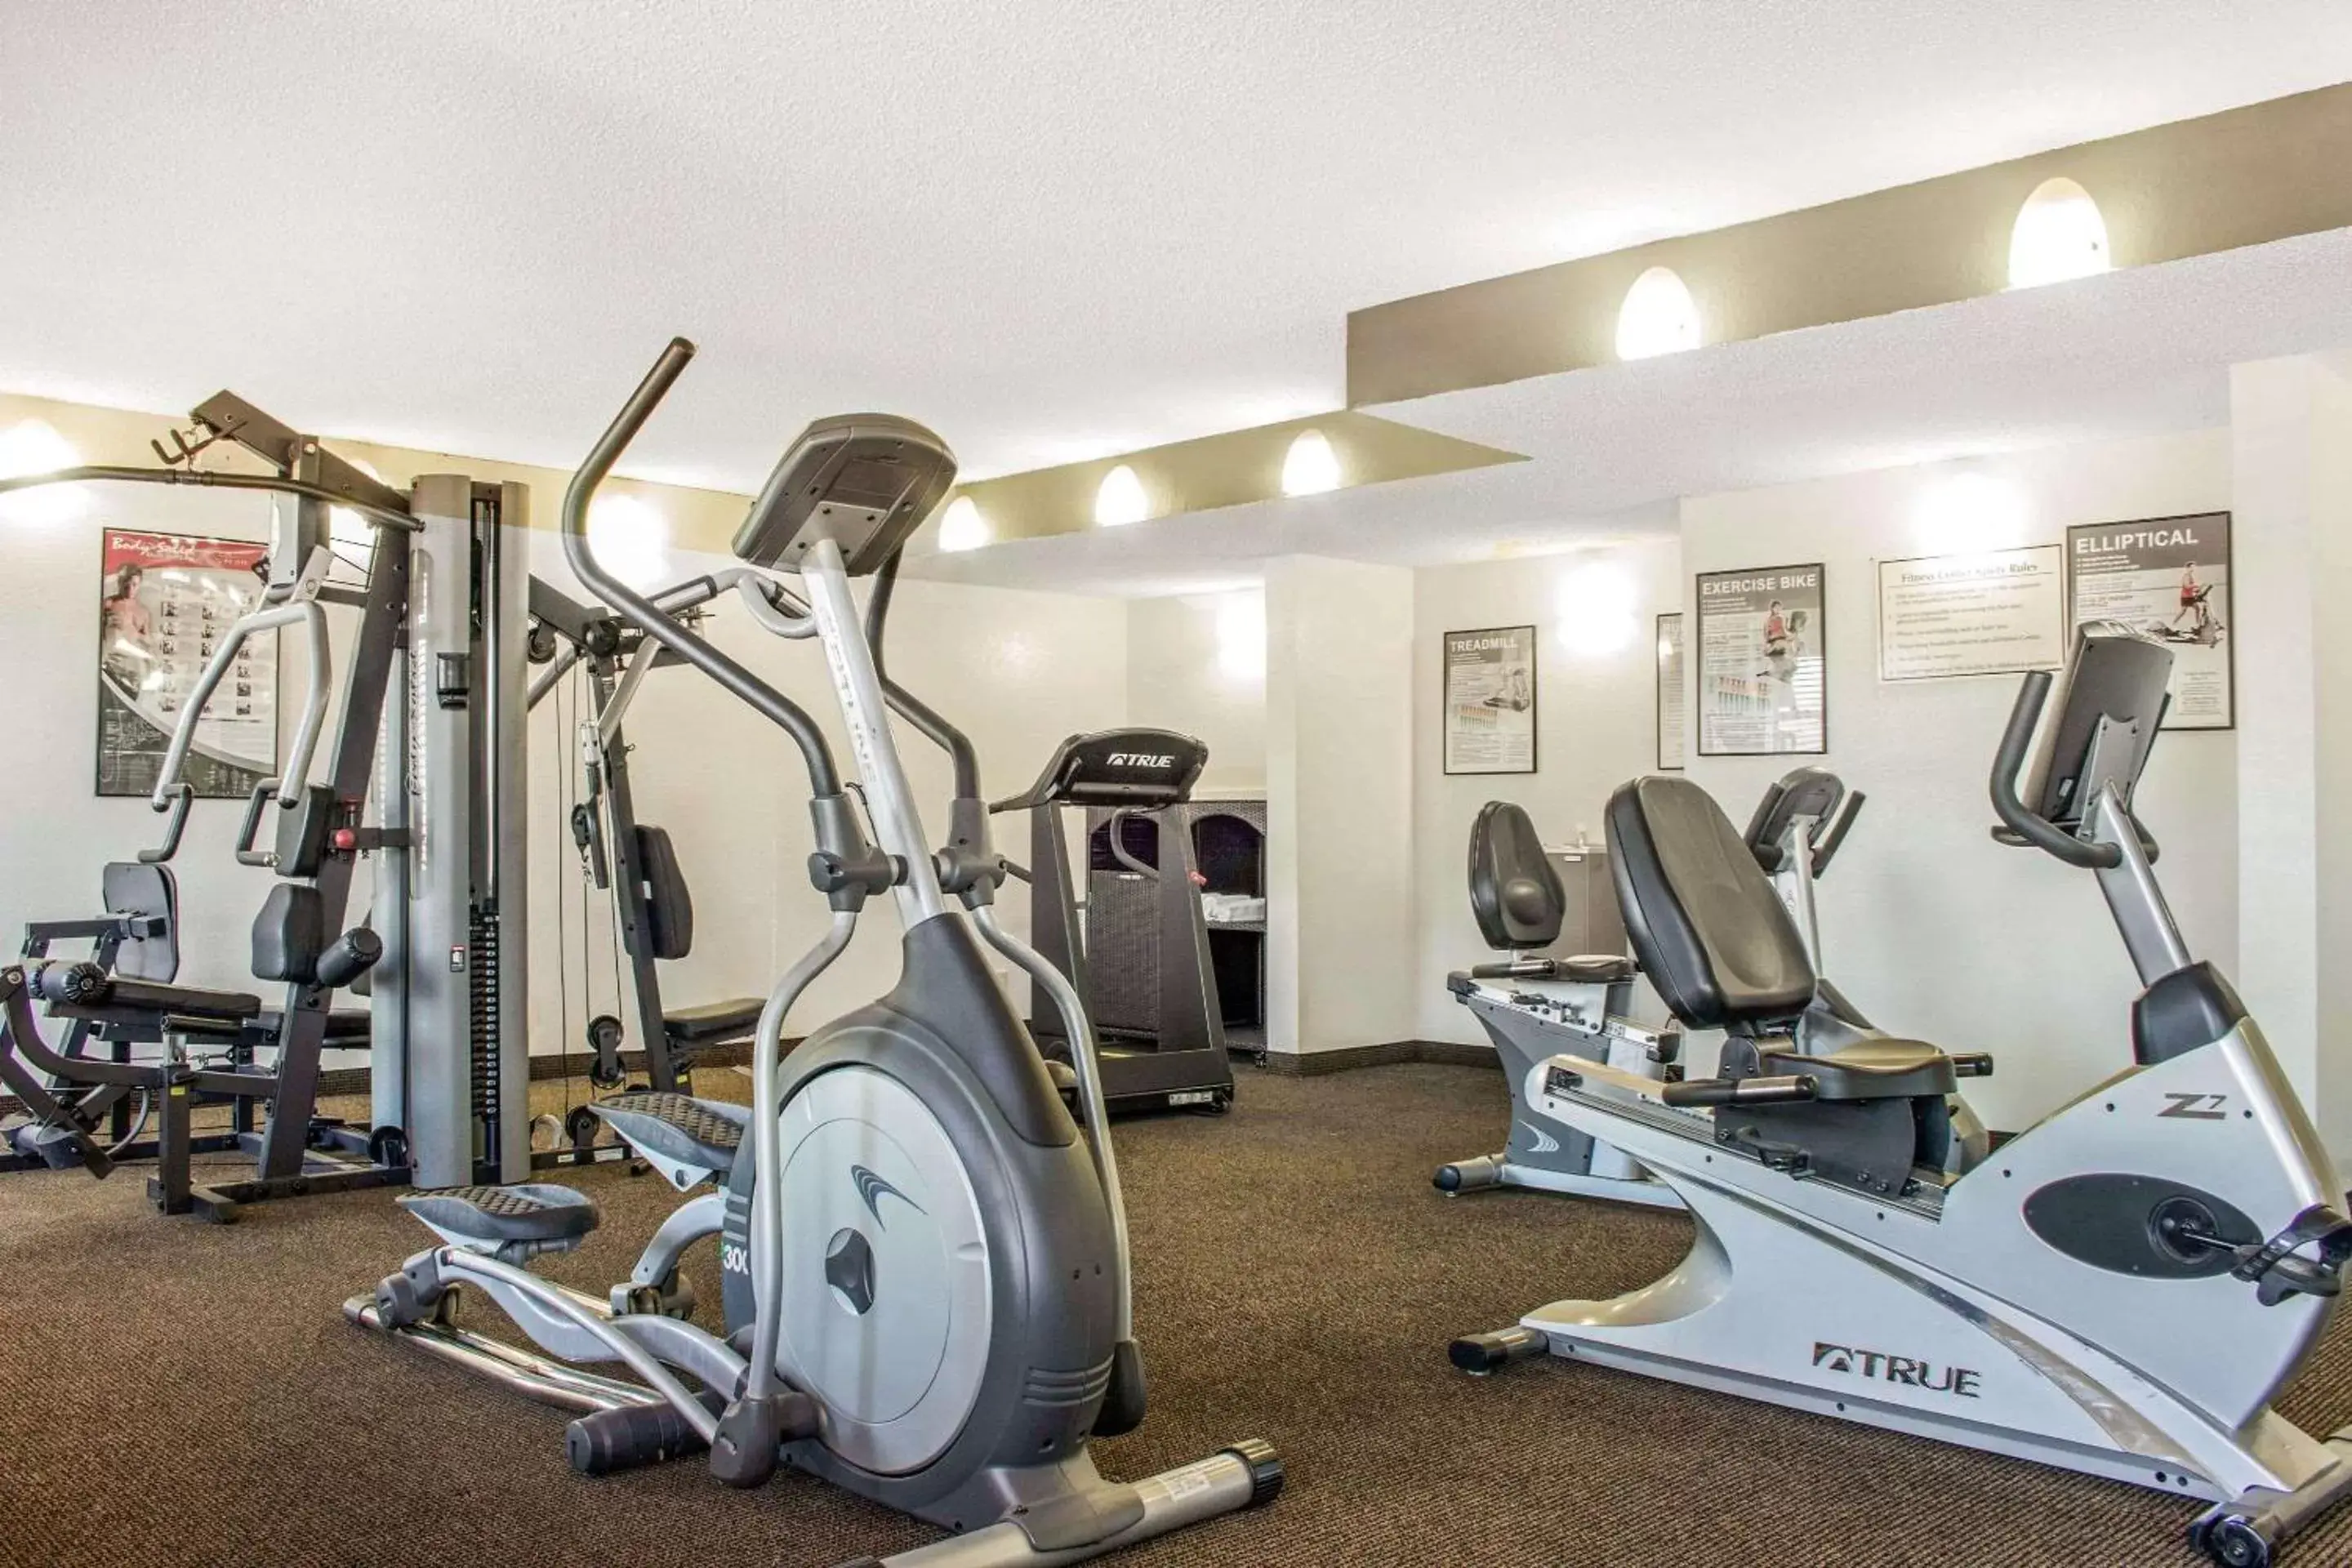 Fitness centre/facilities, Fitness Center/Facilities in Quality Inn Benson I-10 Exit 304